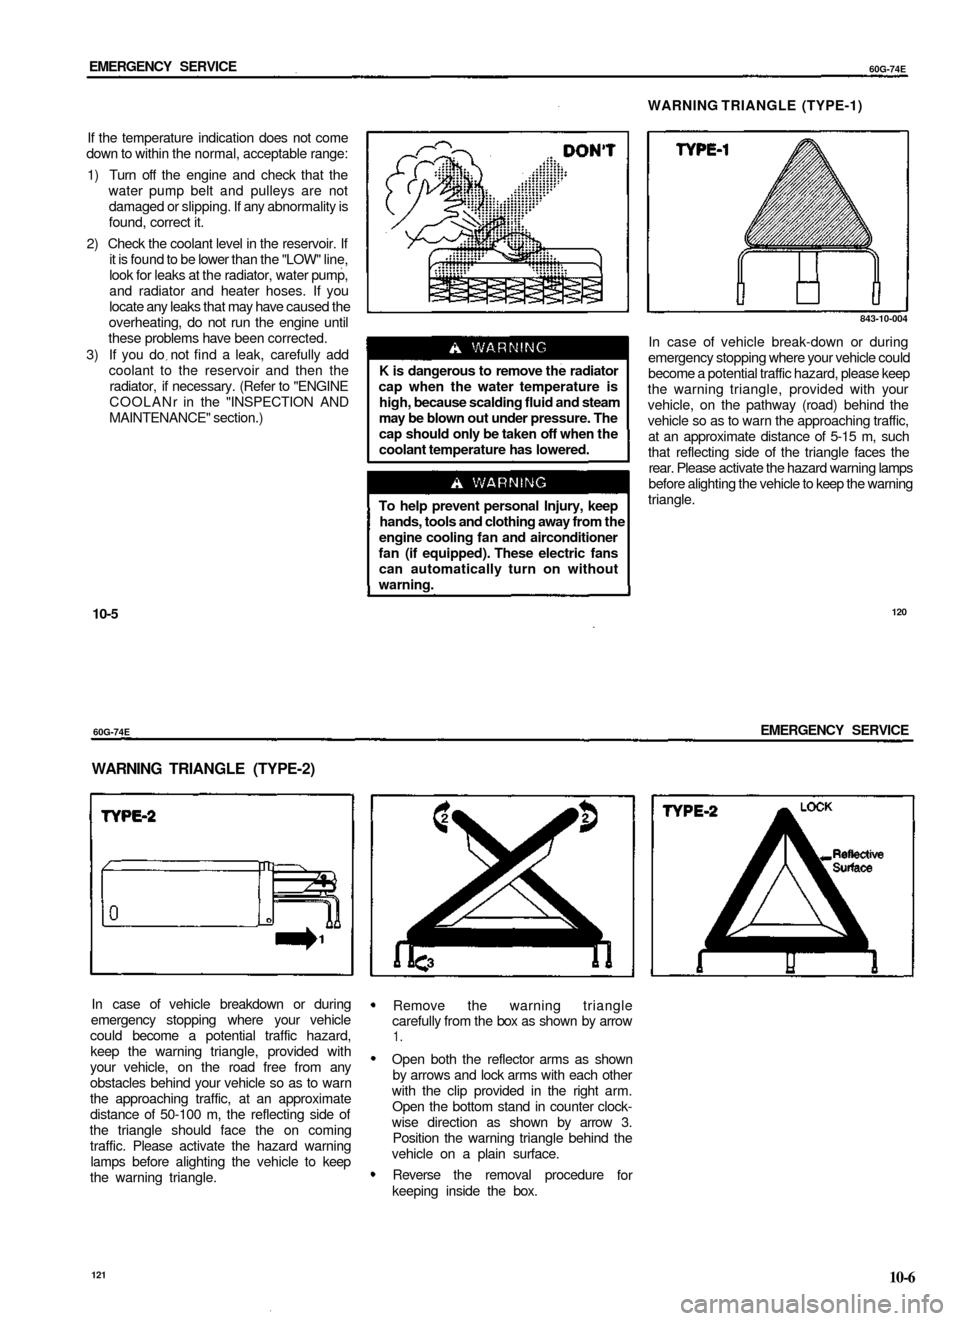 SUZUKI BALENO 1999 1.G Owners Manual 
EMERGENCY SERVICE

60G-74E

WARNING TRIANGLE (TYPE-1)

If the temperature indication does not come

down to within the normal, acceptable range:

1) Turn off the engine and check that the

water pump